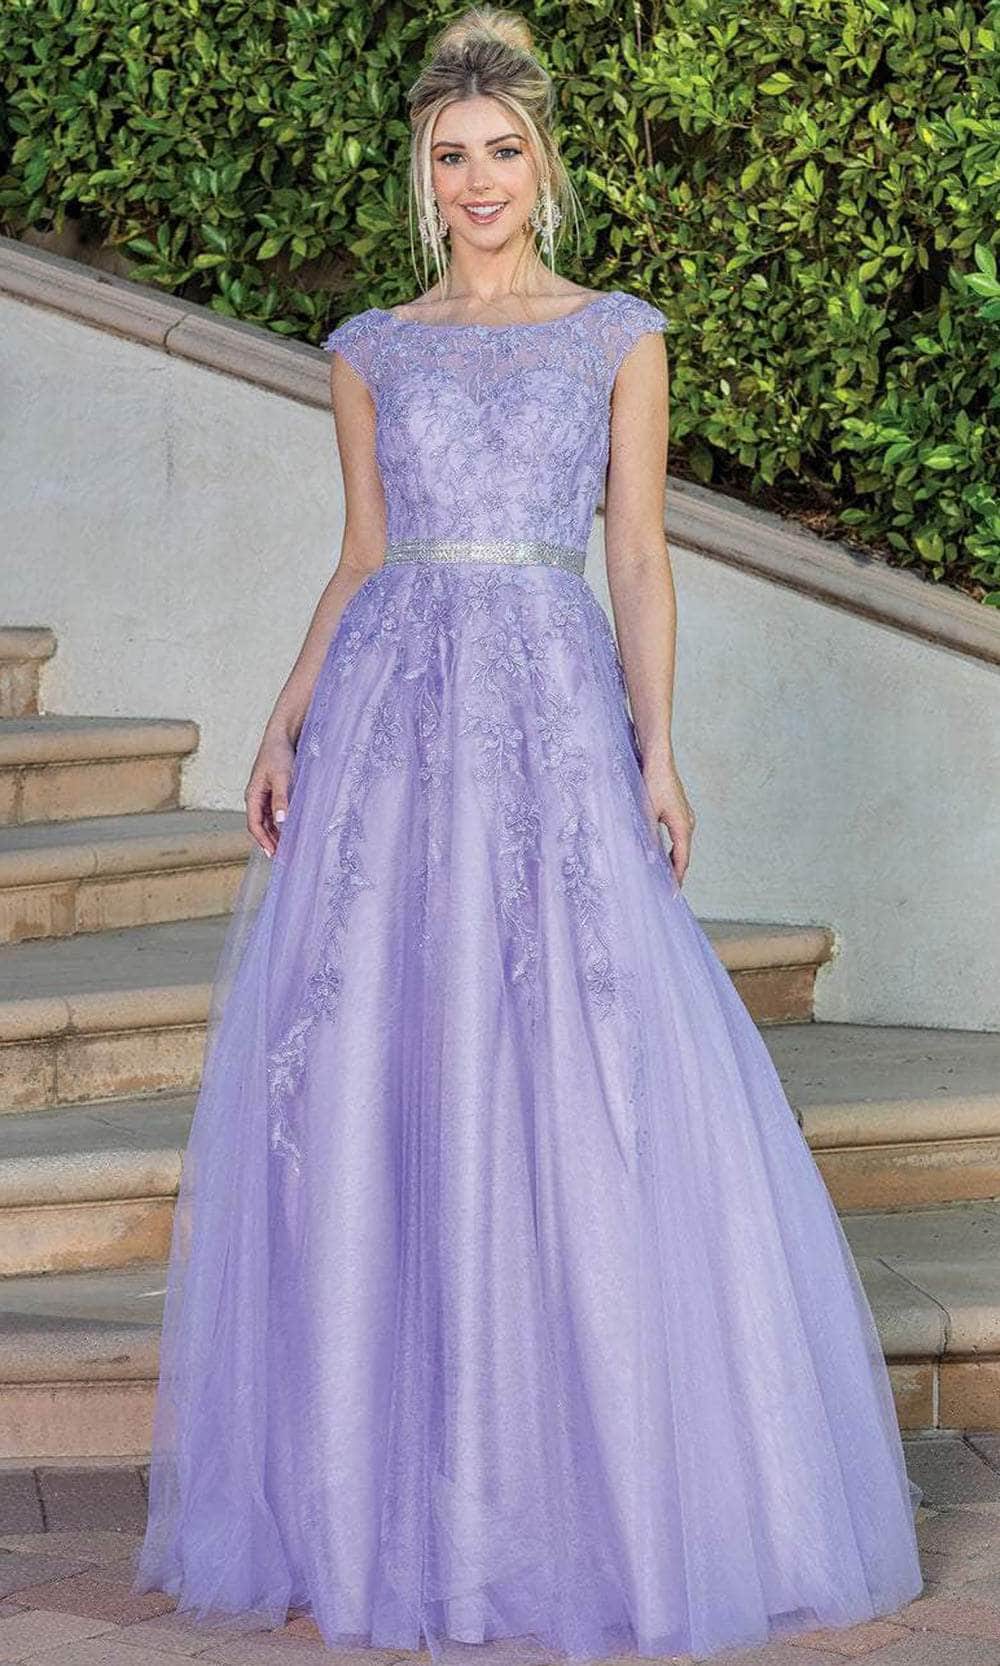 Dancing Queen 4245 - Embroidered Bateau Neck Prom Dress
